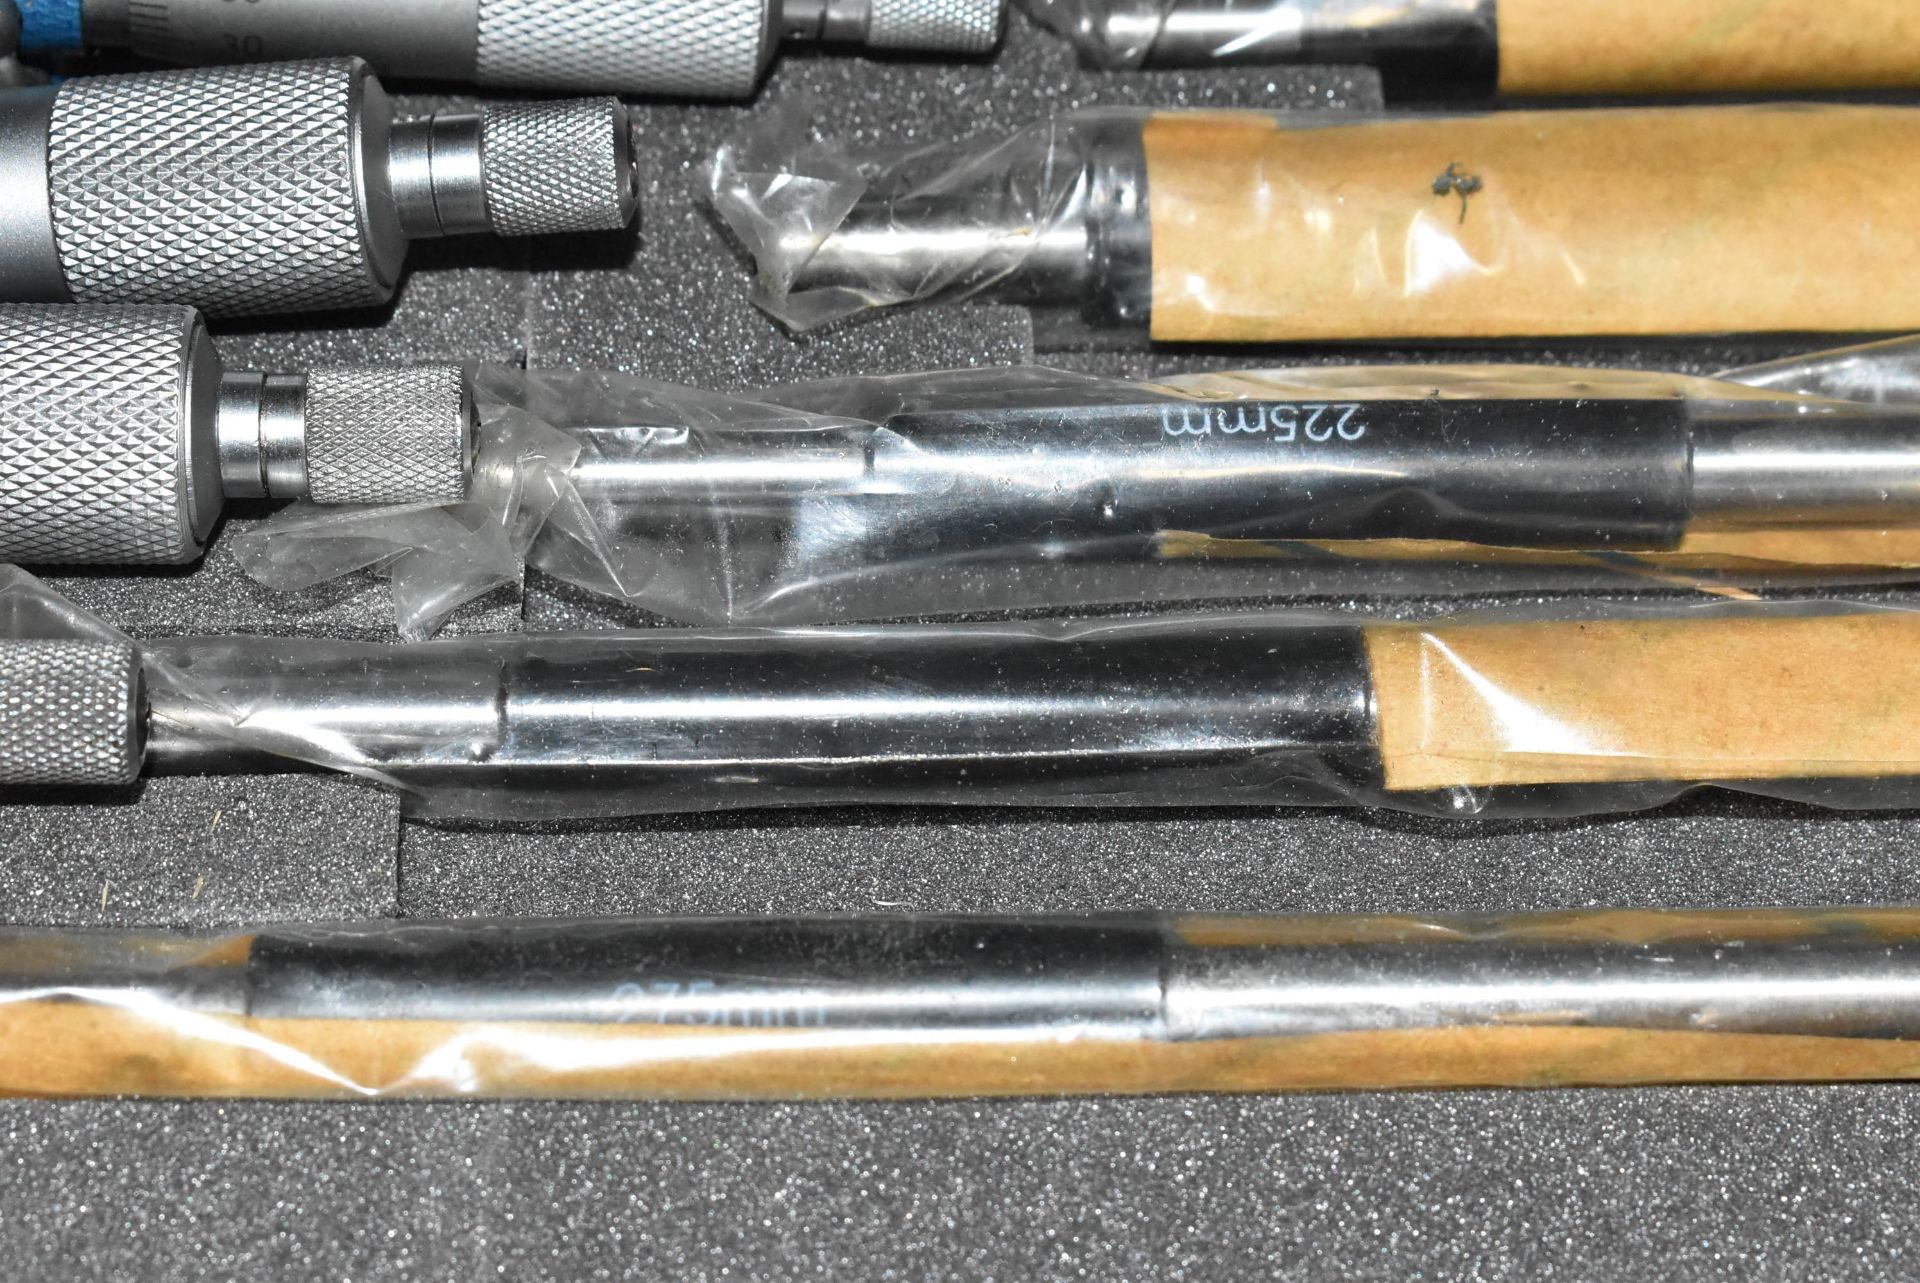 LOT/ OUTSIDE MICROMETER SET FROM 25MM TO 275MM - Image 3 of 4